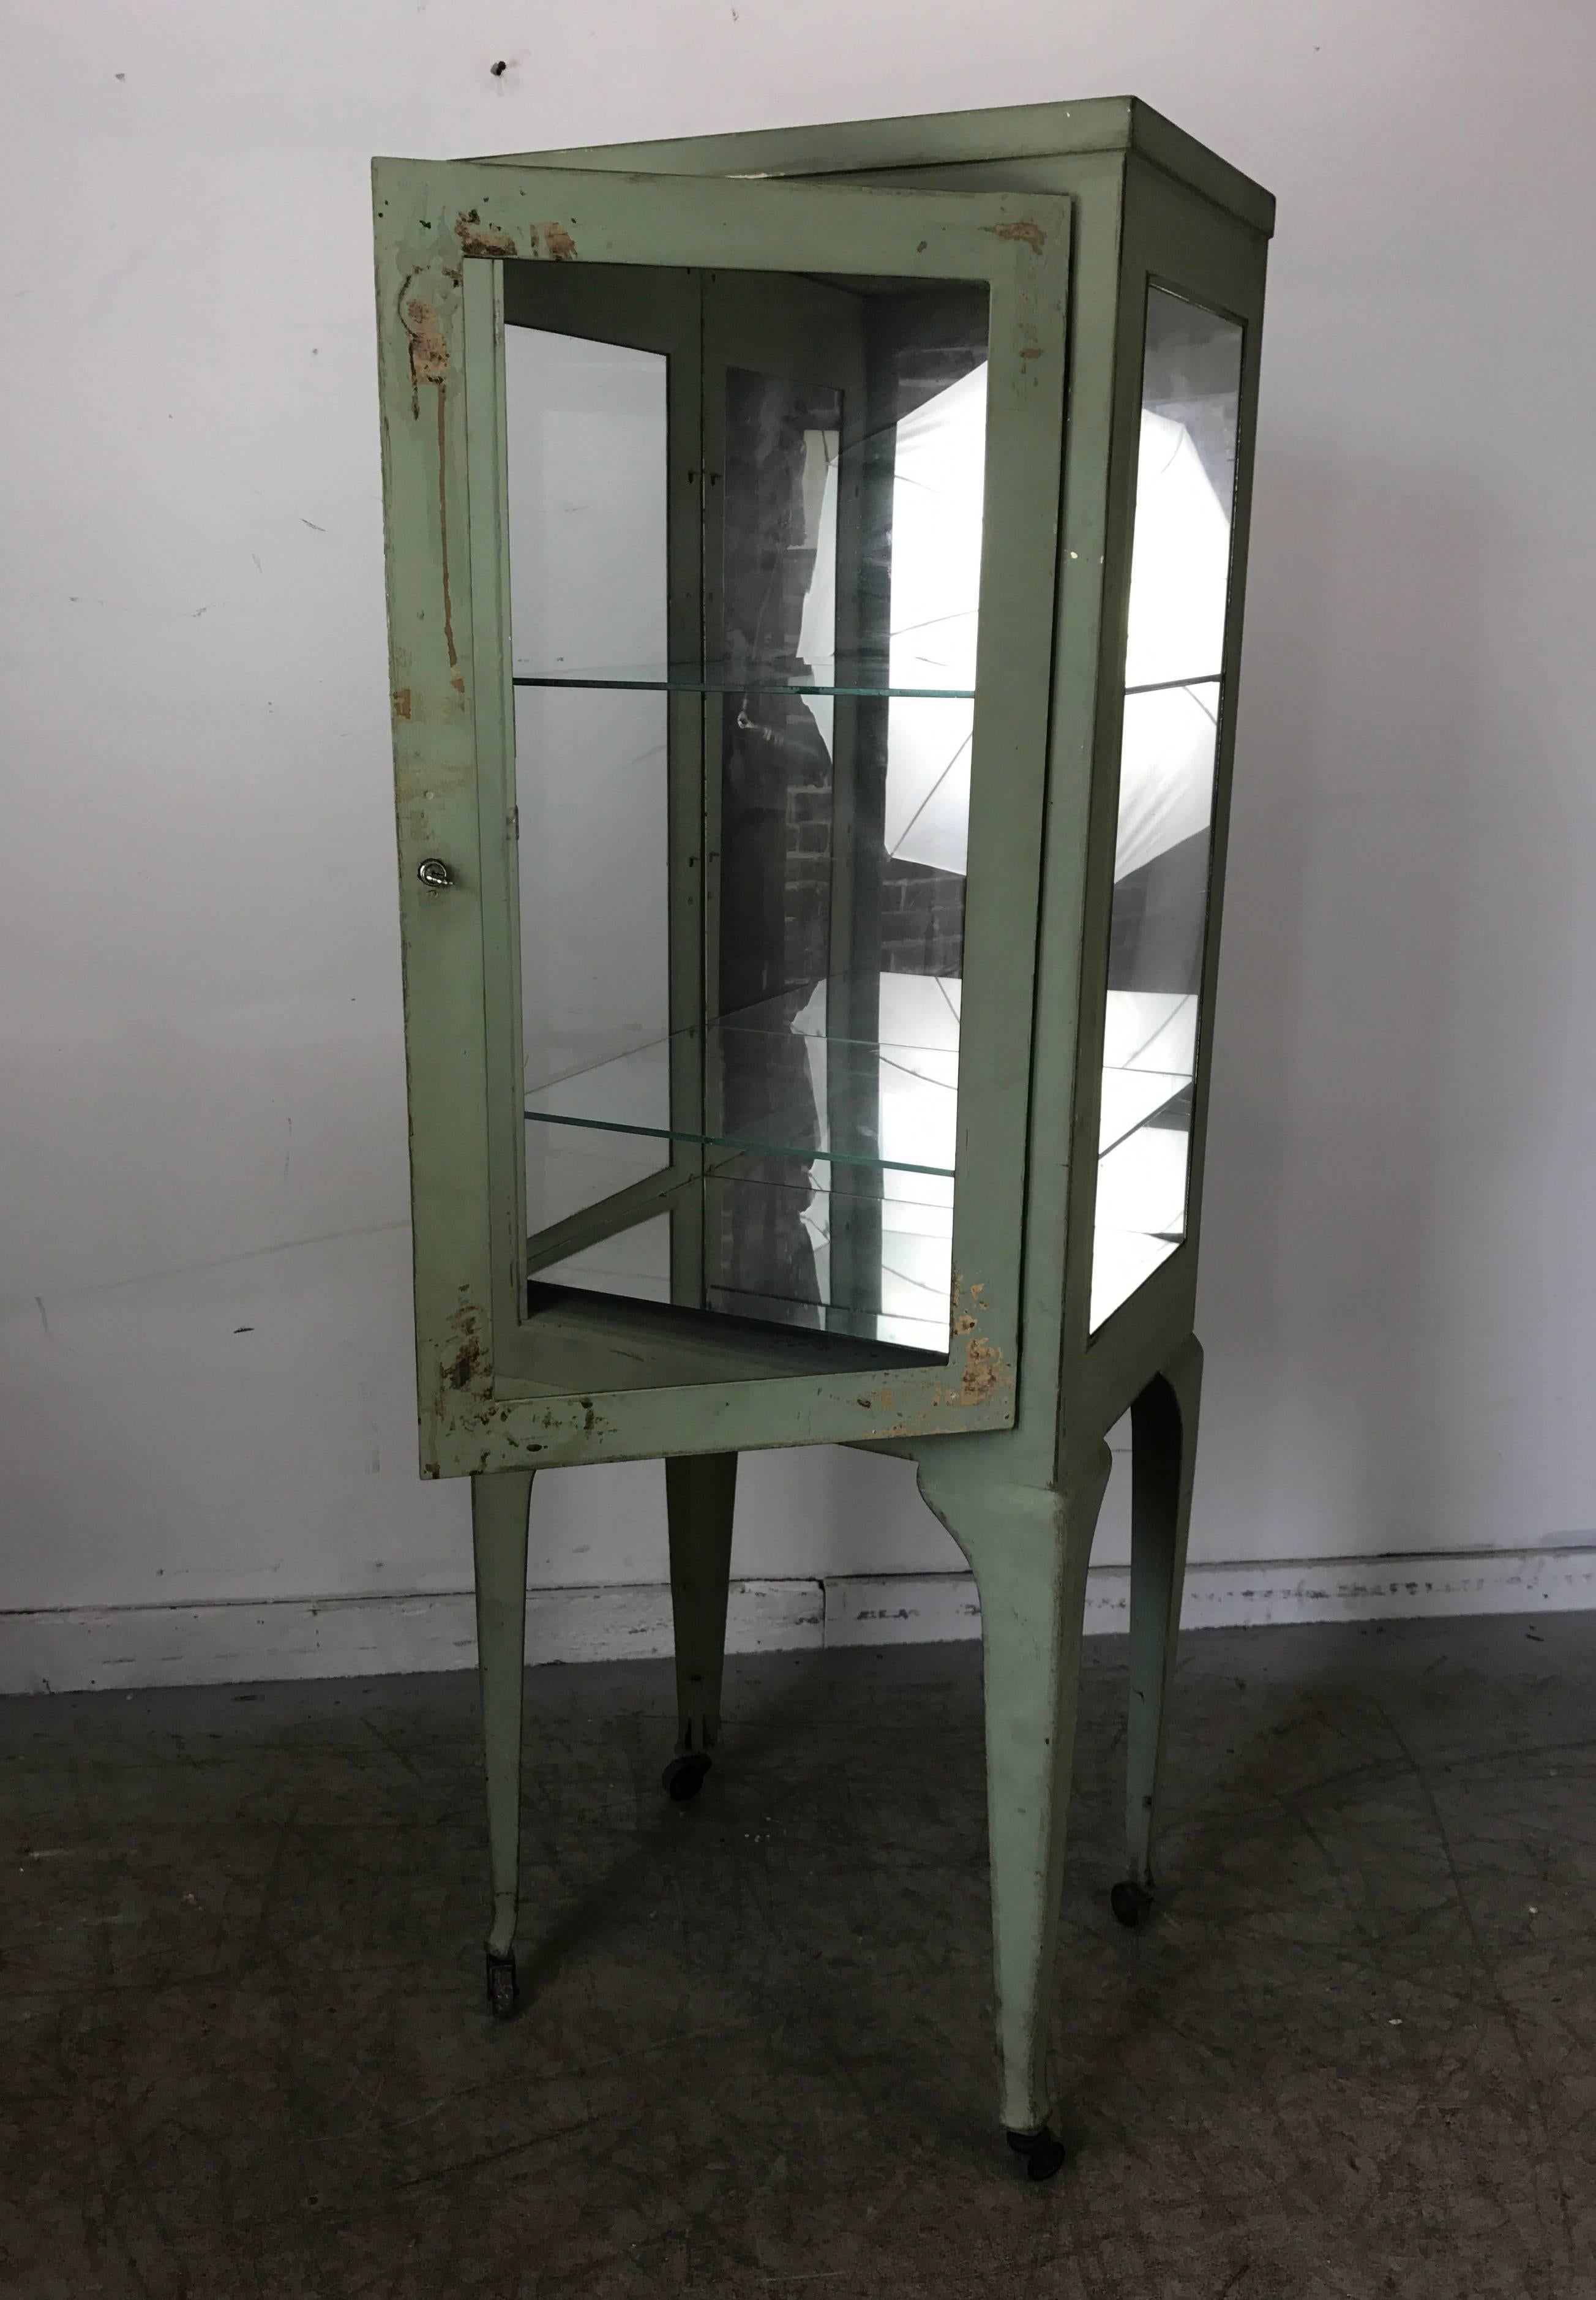 American Classic 1920s Metal and Glass Specimen Cabinet, Medical, Industrial